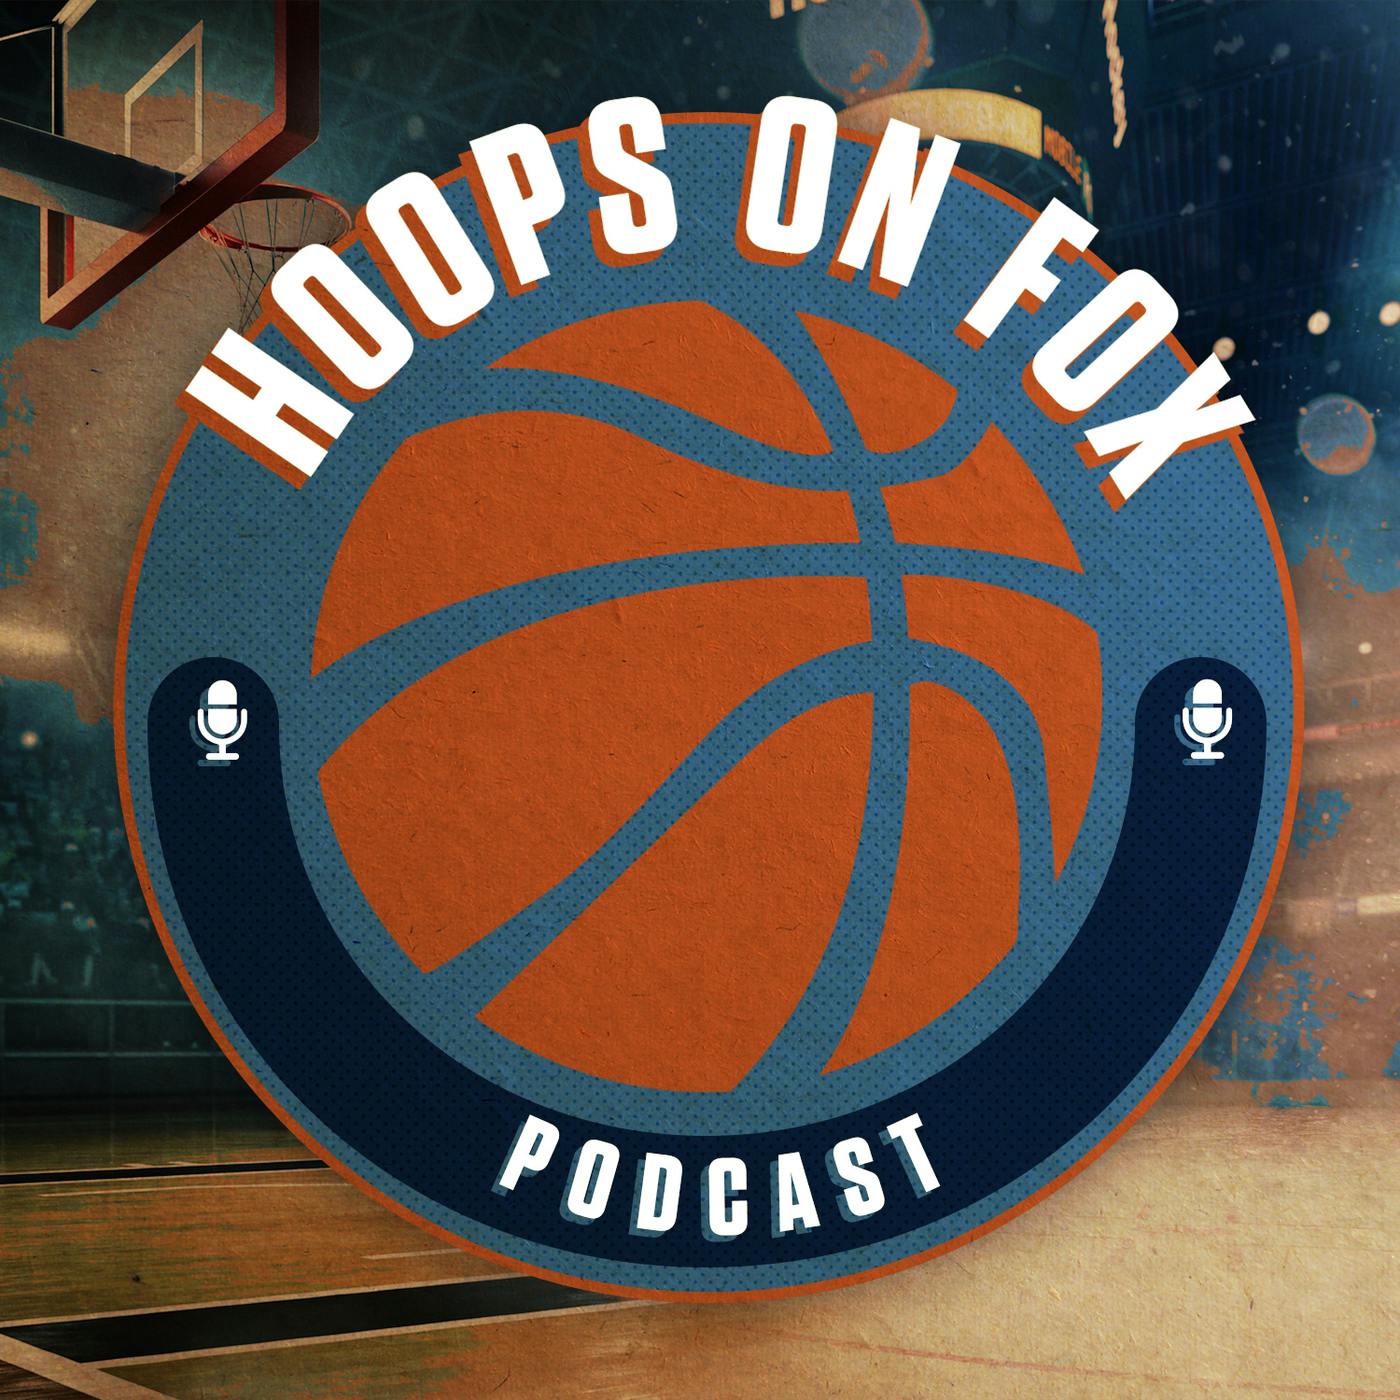 Ep. 48 - March Madness with Evan Daniels + Steph Curry, LeBron & James Harden